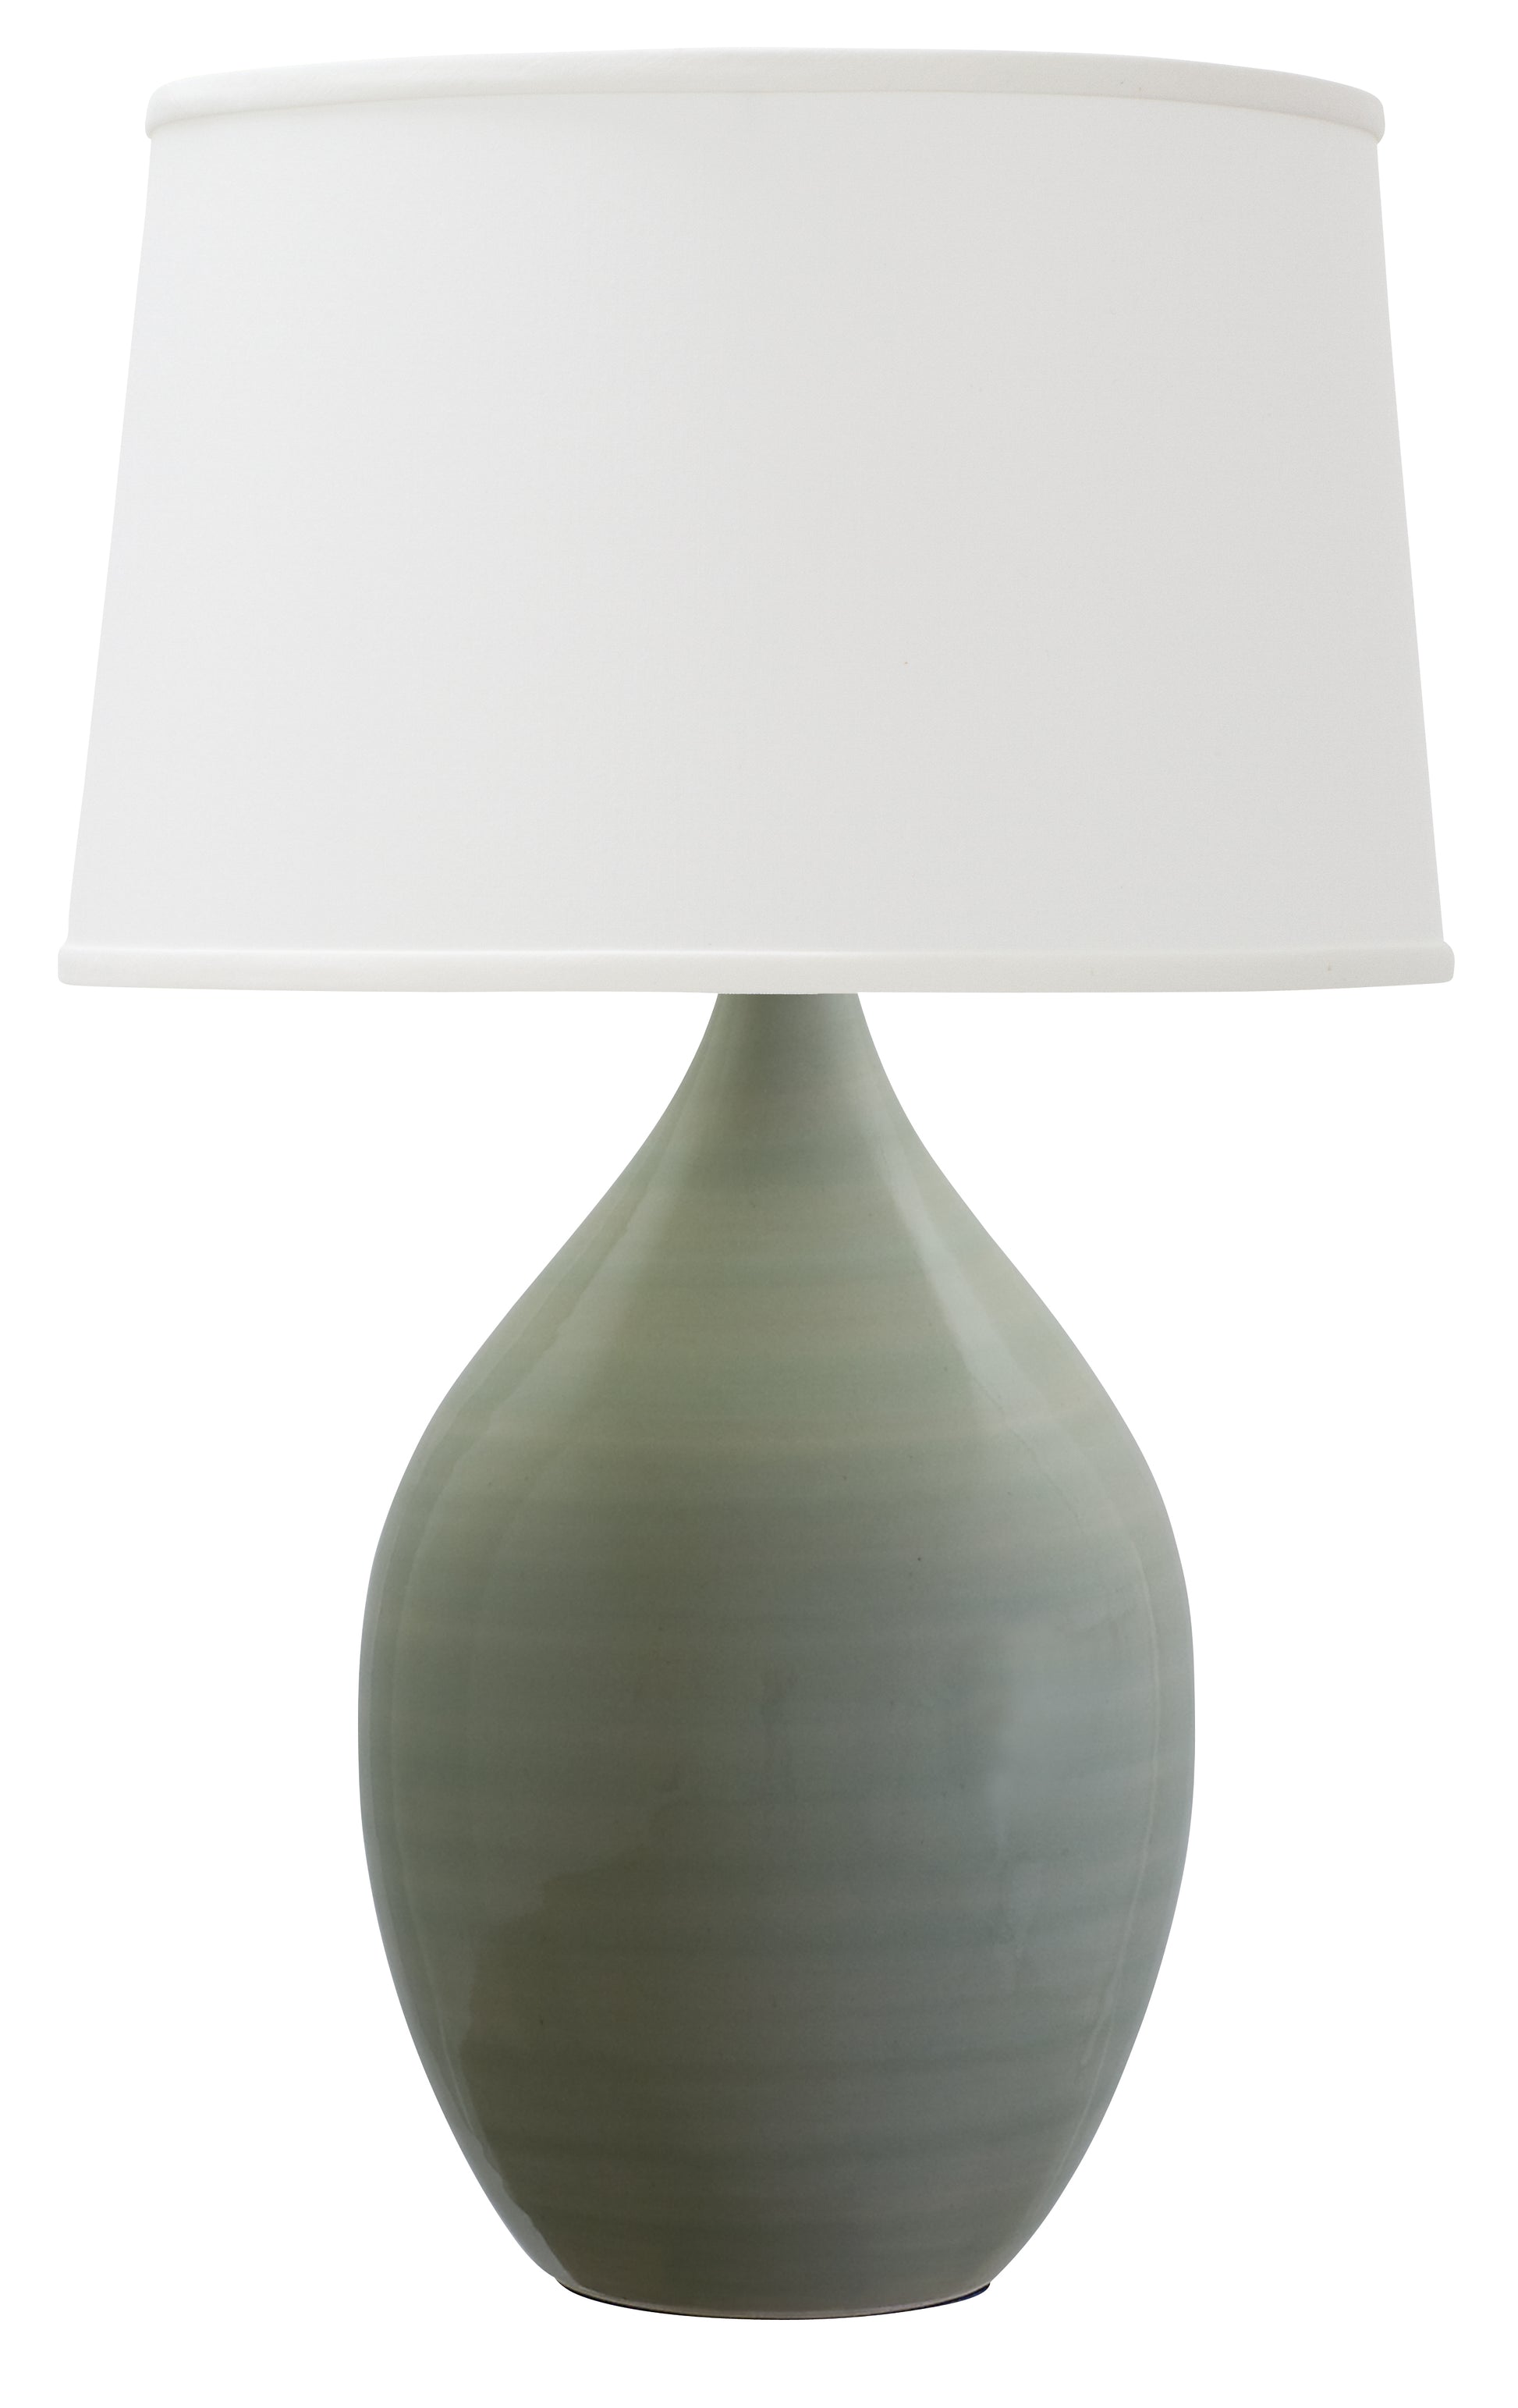 House of Troy Scatchard 24.5" Stoneware Table Lamp in Celadon GS402-CG